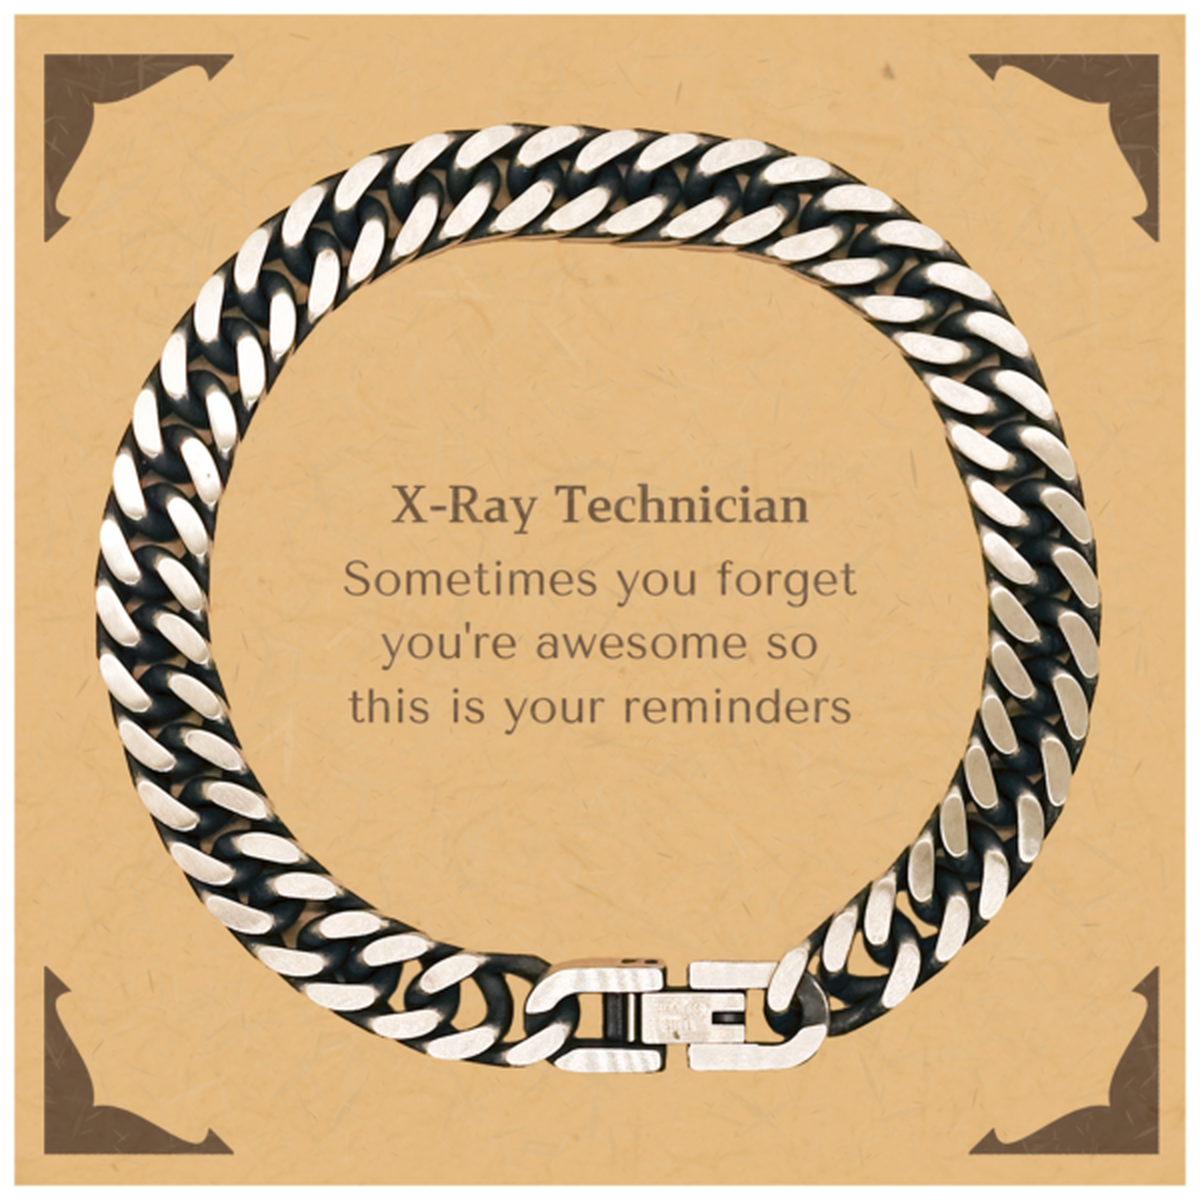 Sentimental X-Ray Technician Cuban Link Chain Bracelet, X-Ray Technician Sometimes you forget you're awesome so this is your reminders, Graduation Christmas Birthday Gifts for X-Ray Technician, Men, Women, Coworkers